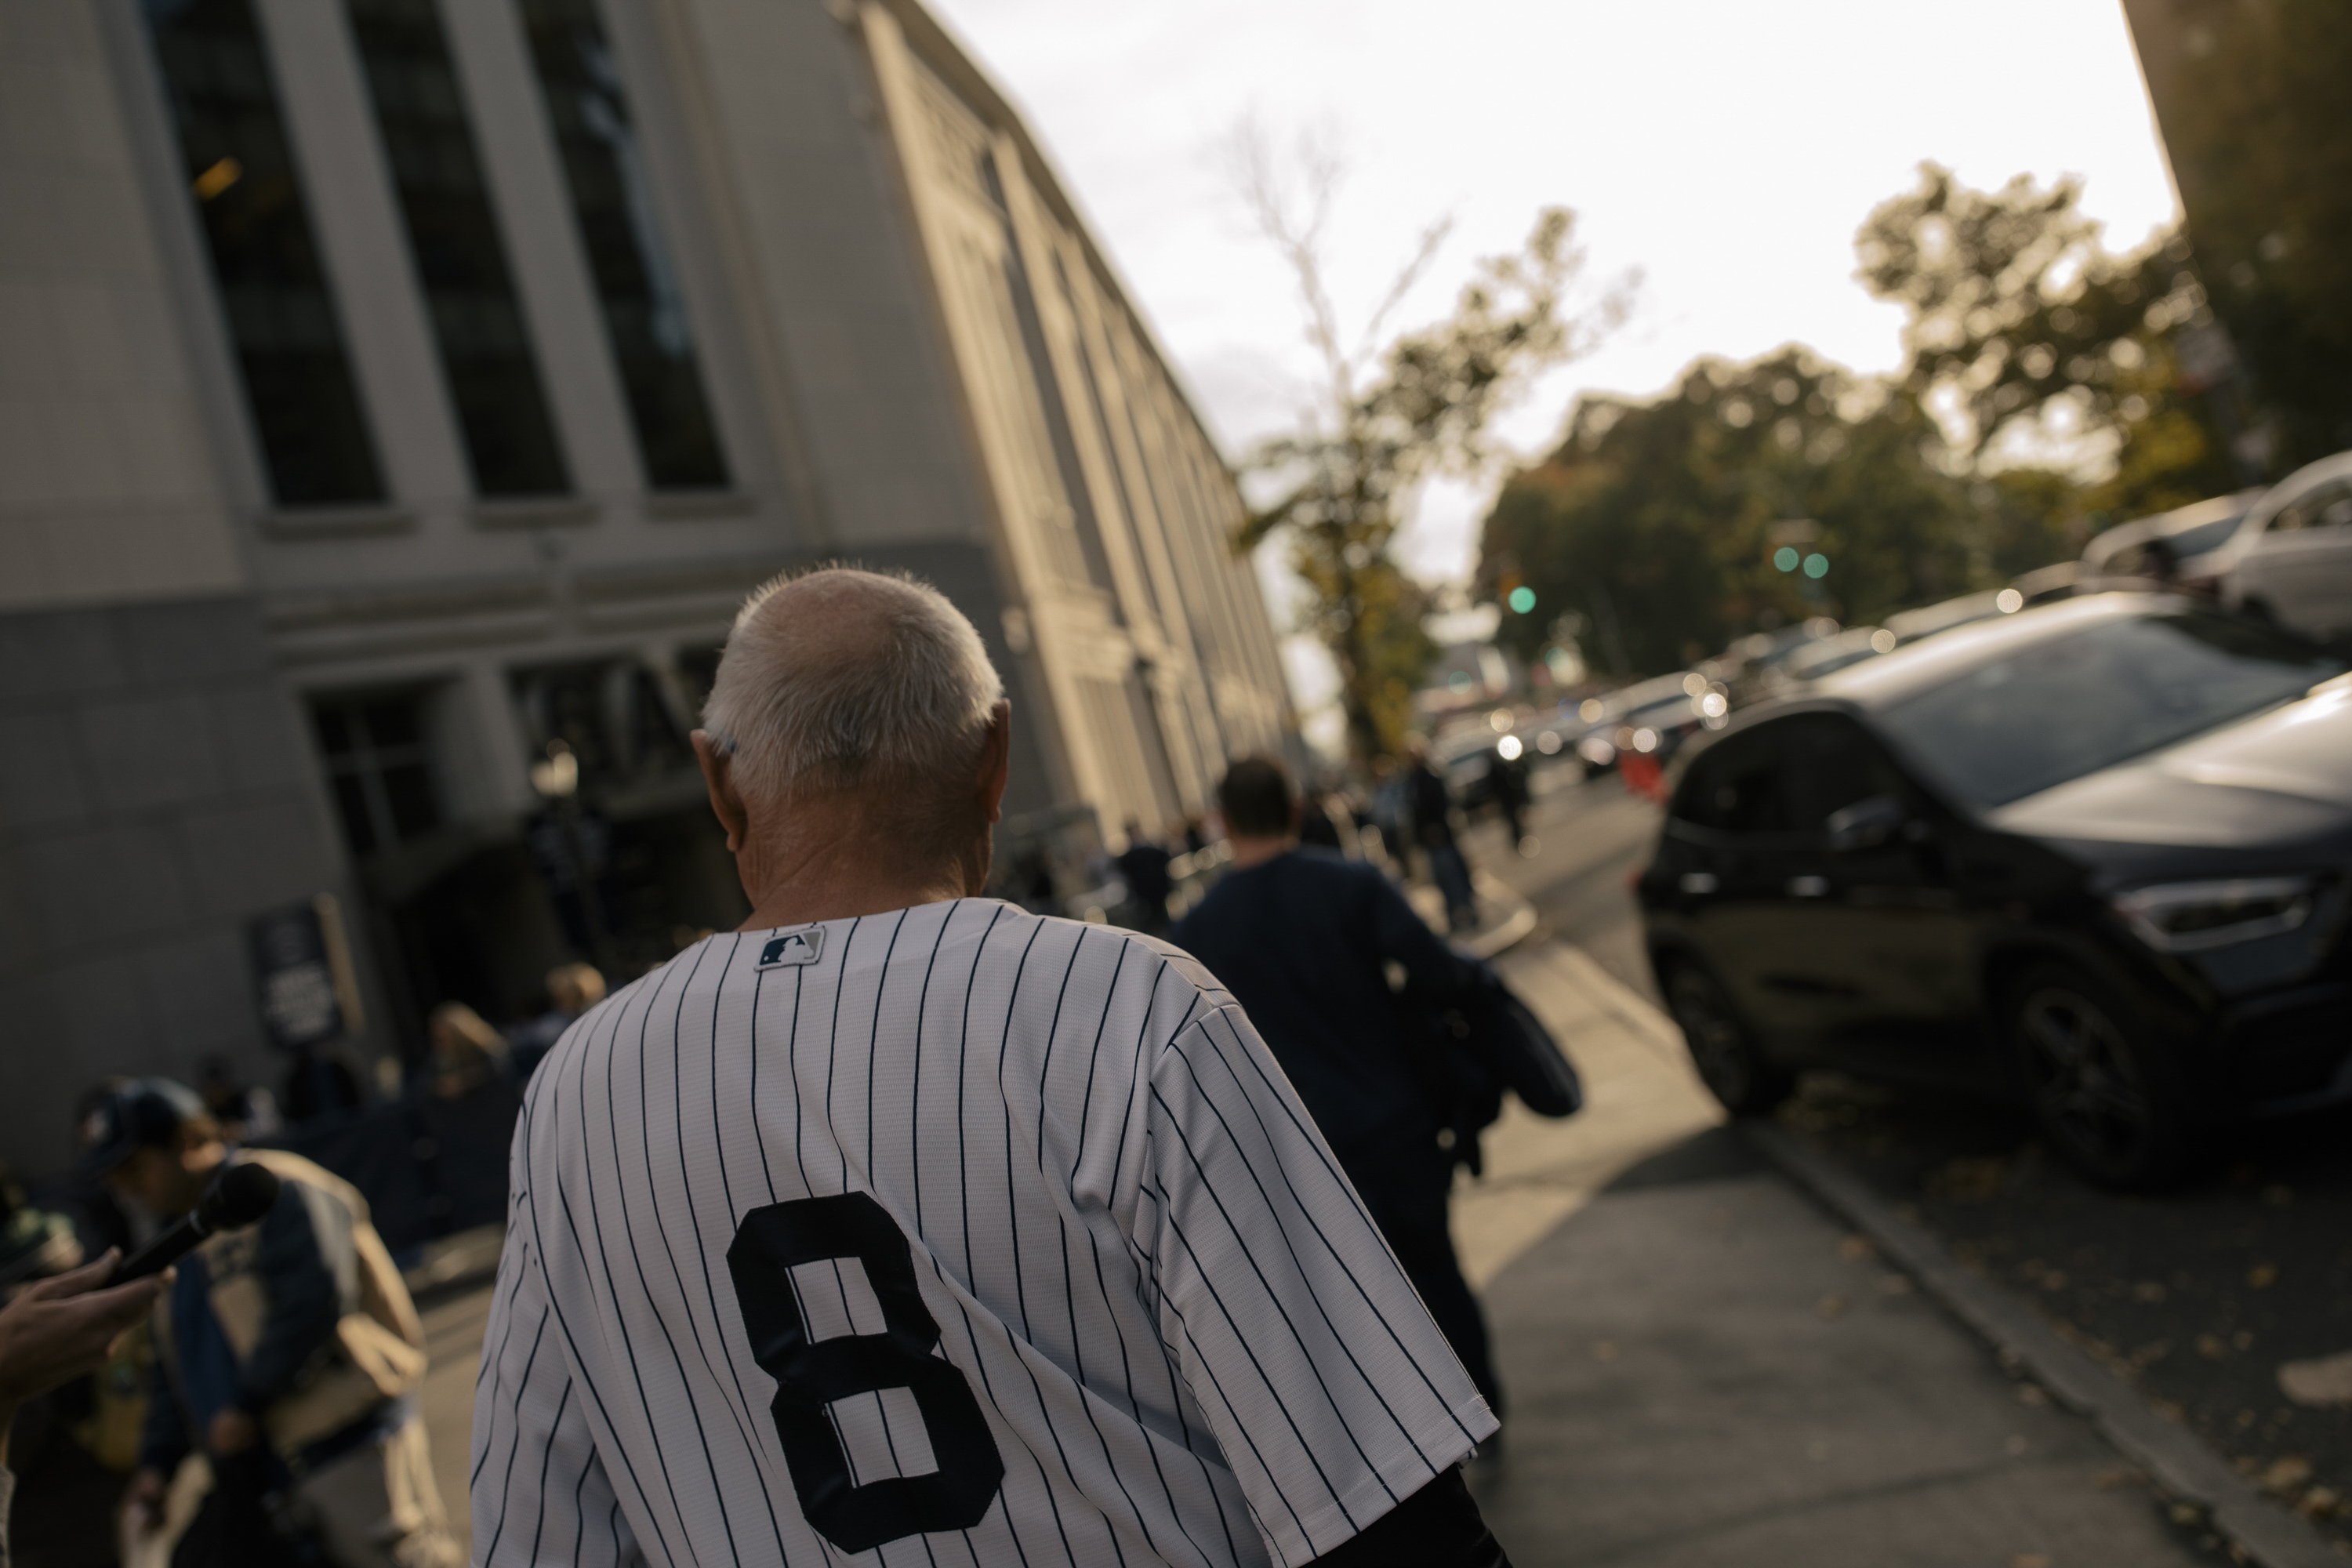 Meet Some of the Yankees Biggest Fans